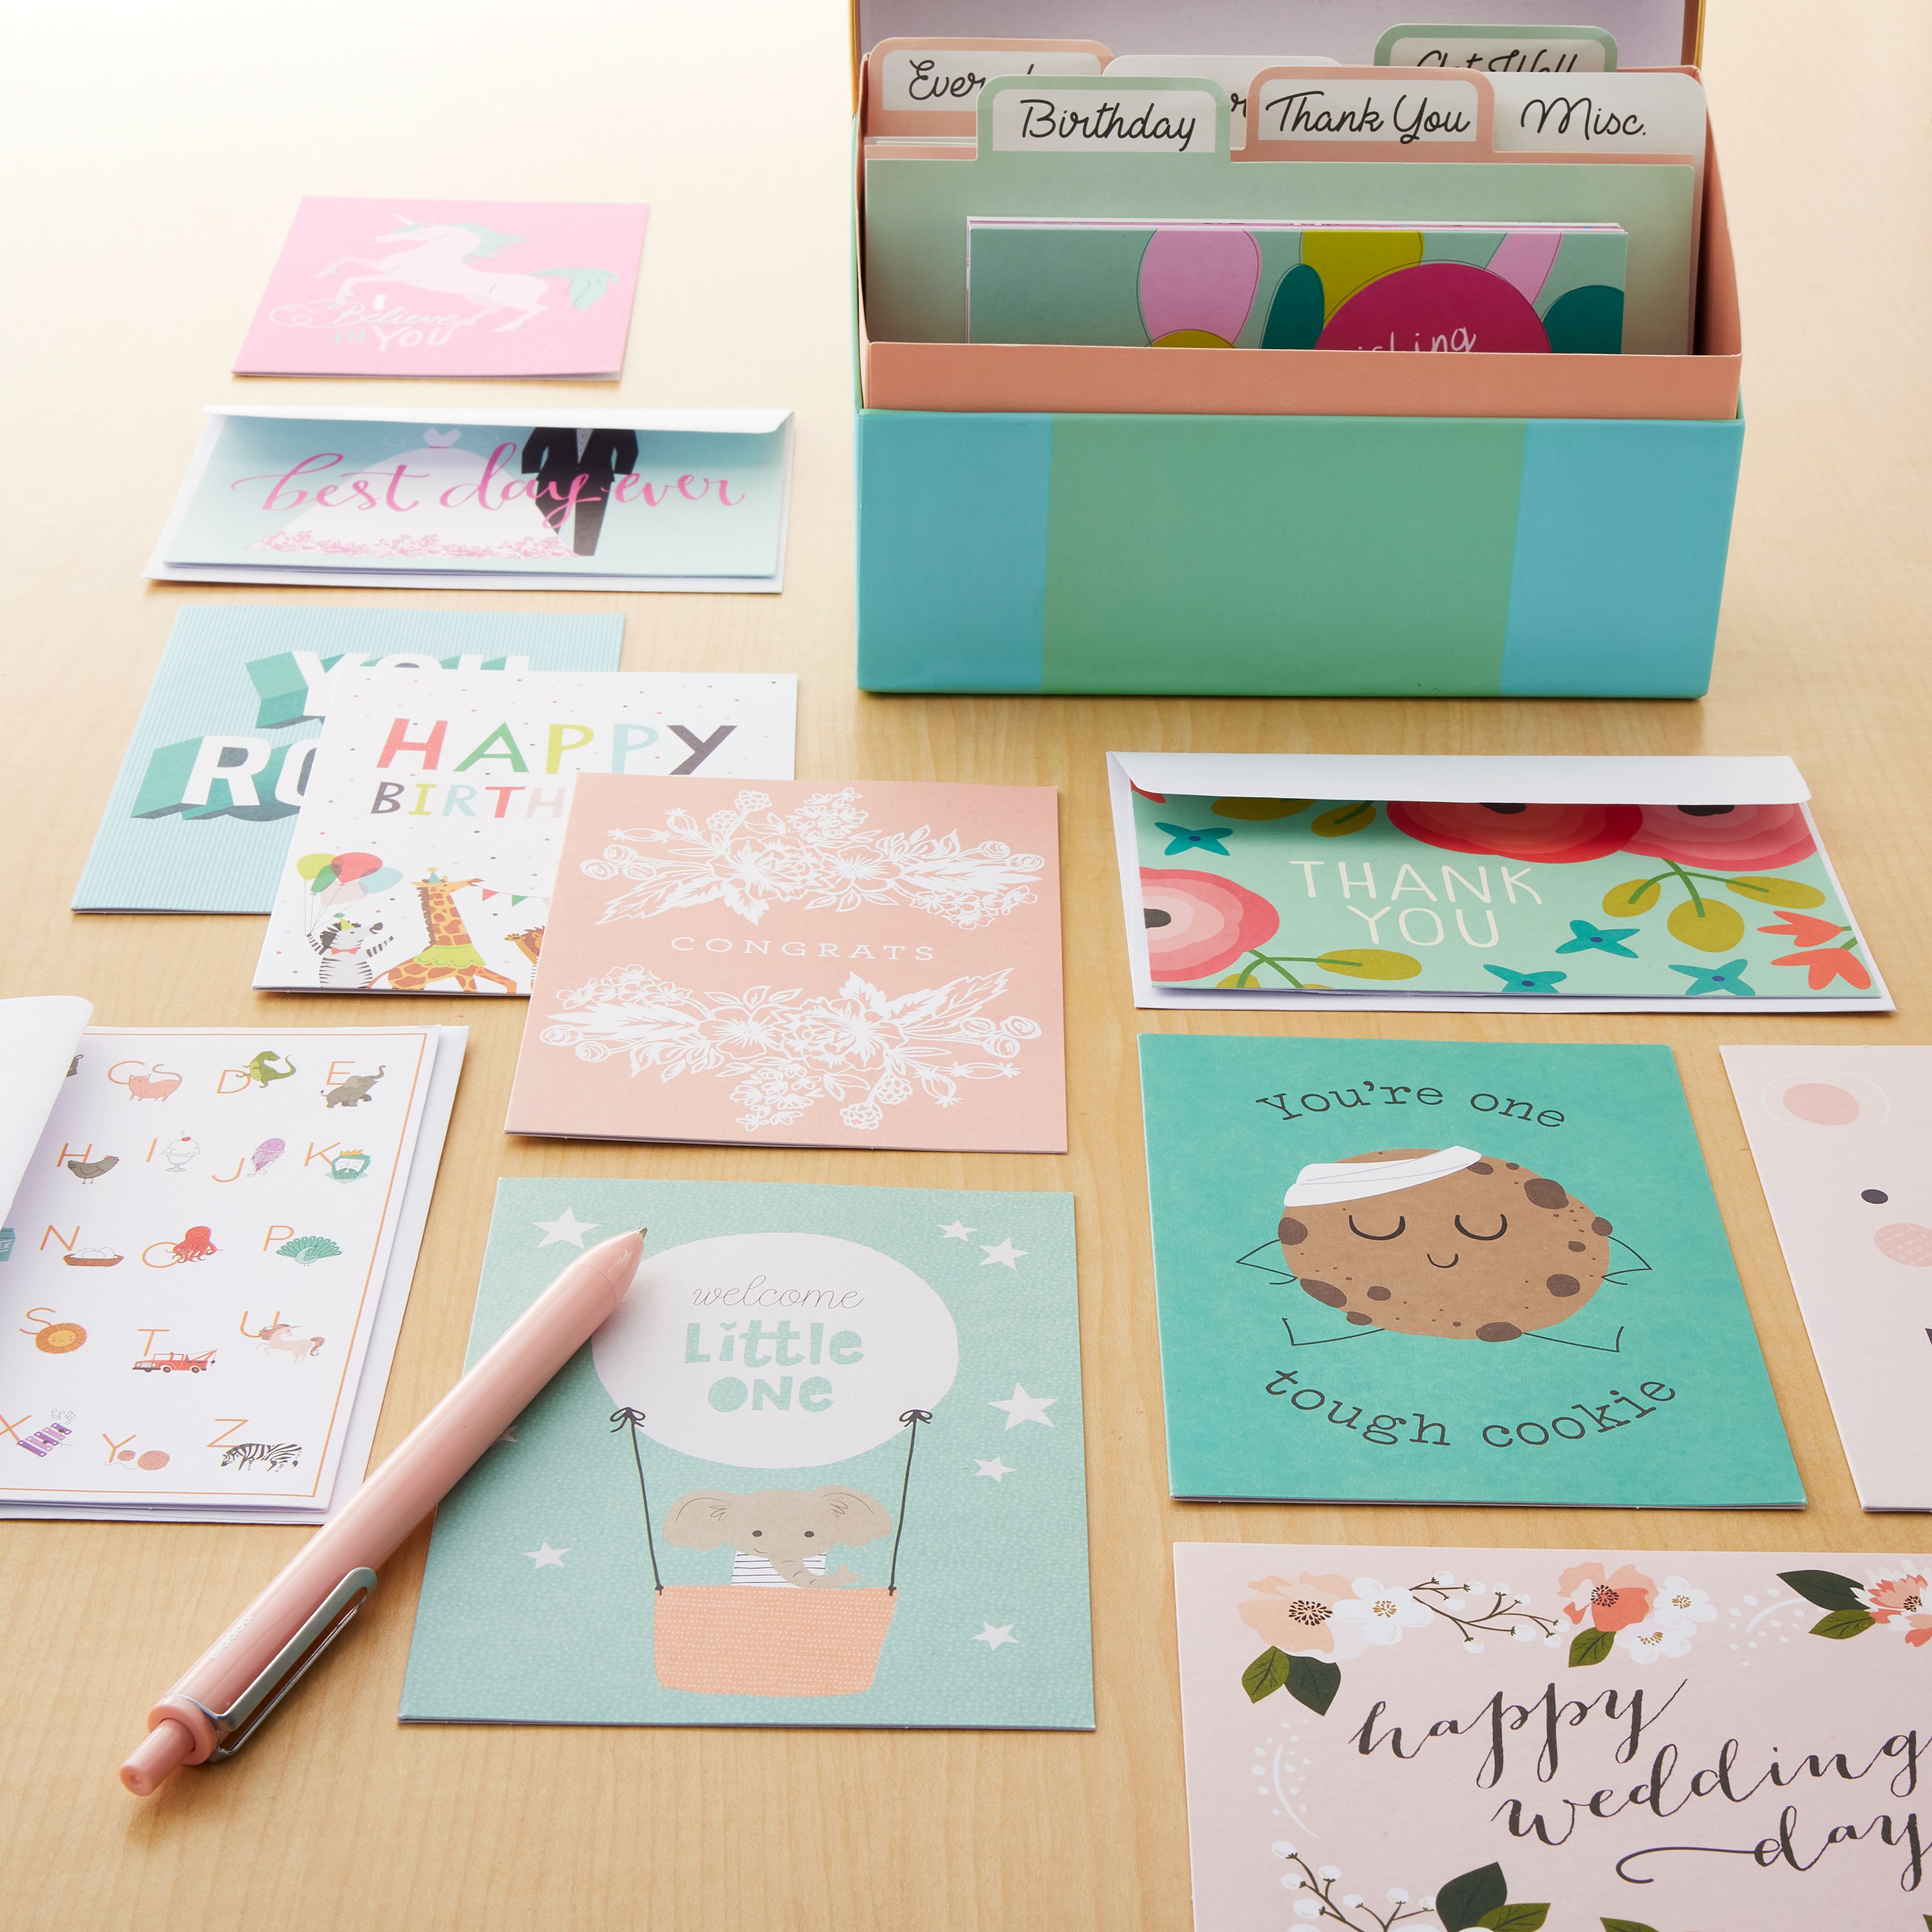 Browse All Greeting Card Assortment Boxes